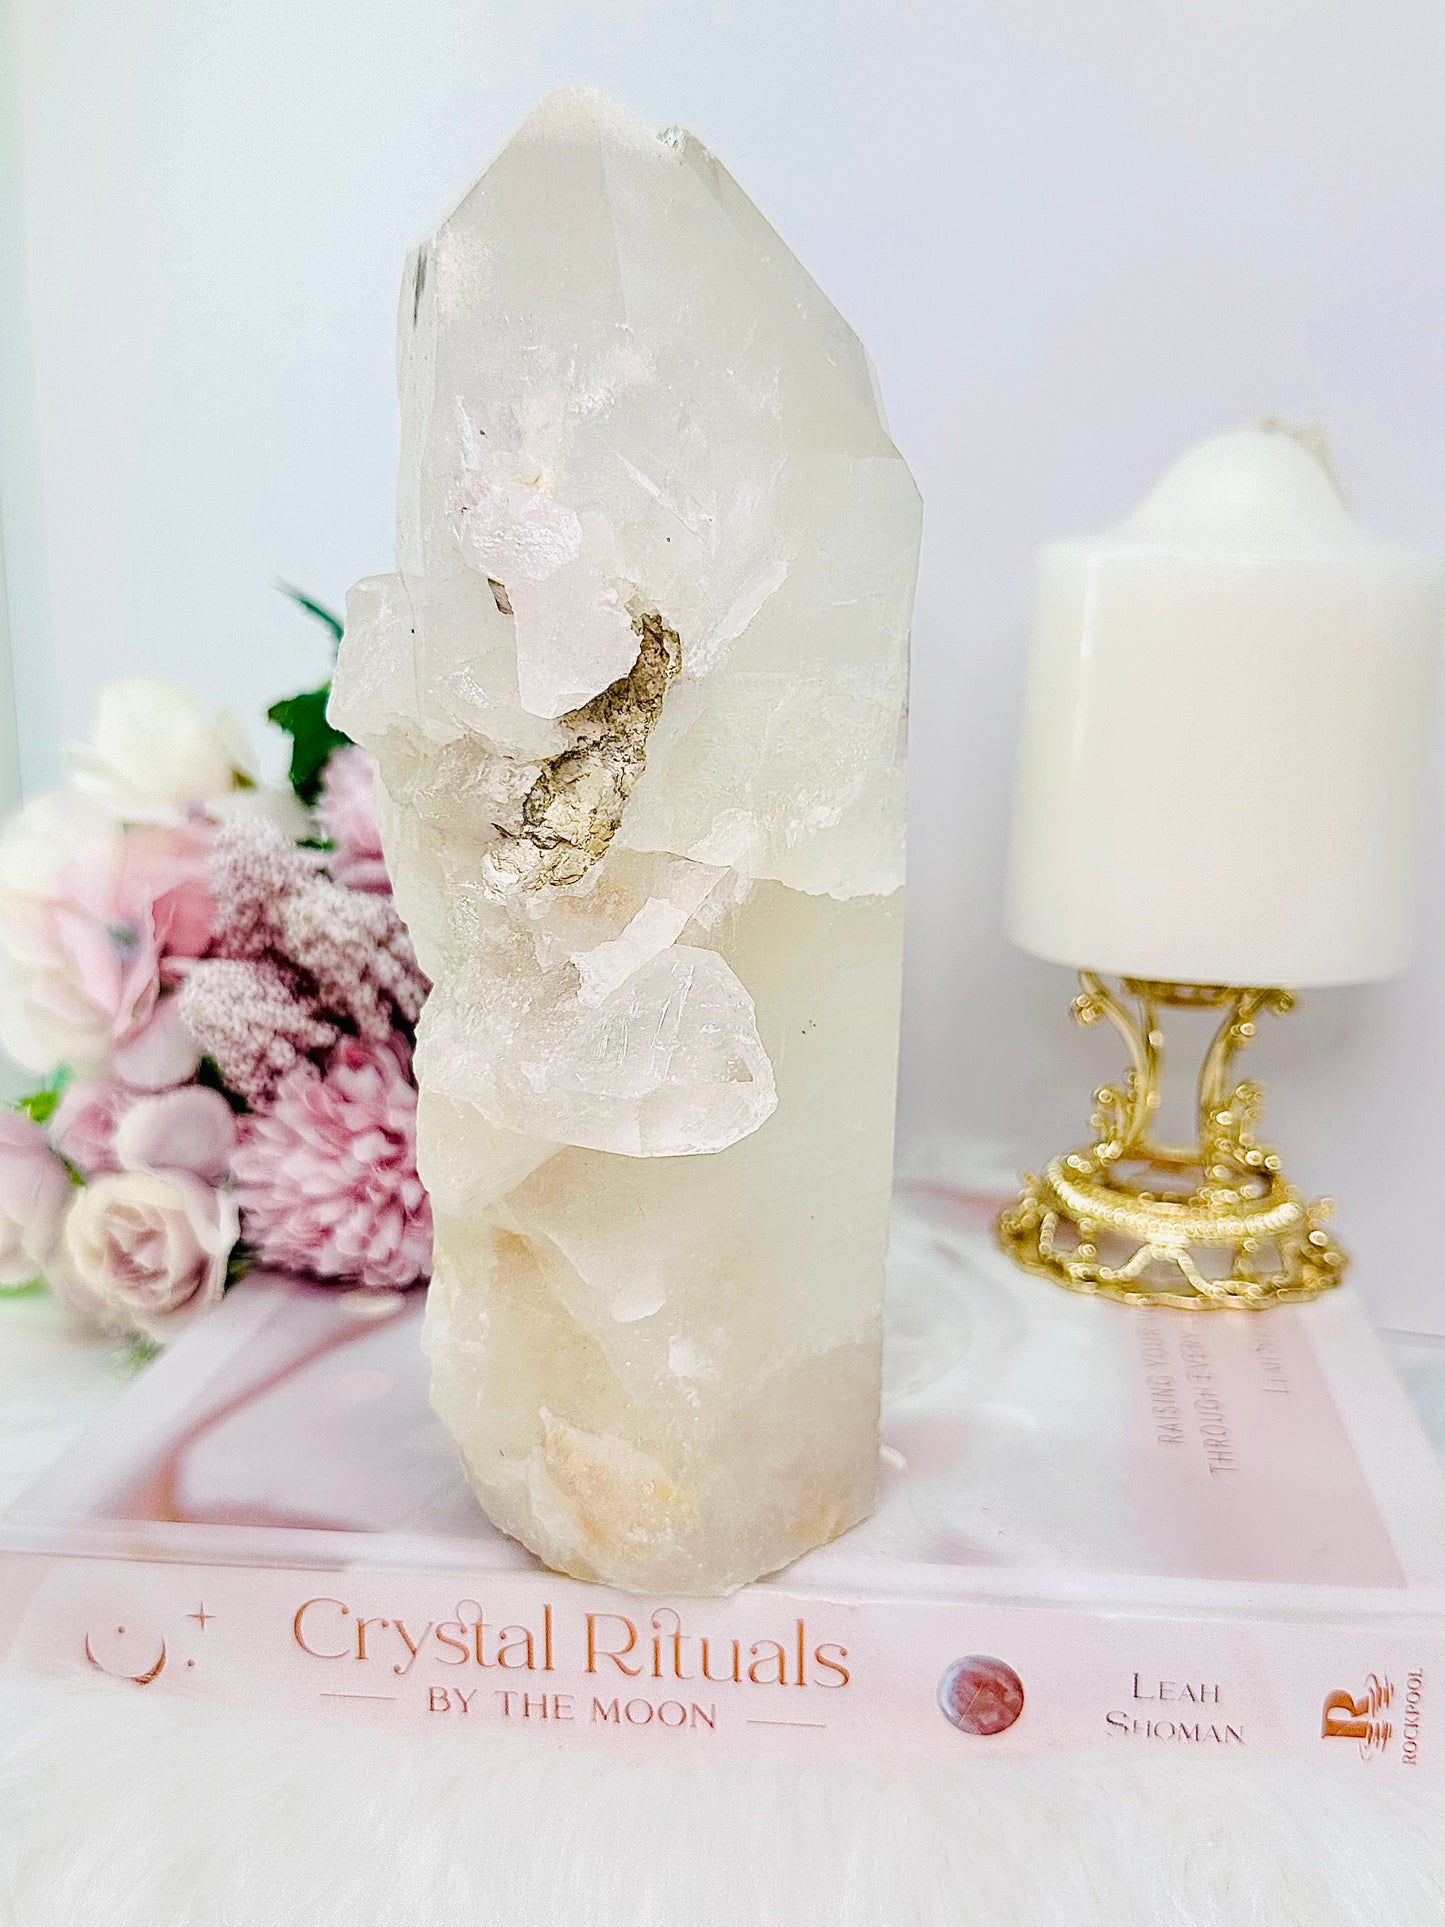 Incredibly Powerful Natural Huge Clear Quartz Double Point Tower From Brazil 1.56KG 18cm Tall